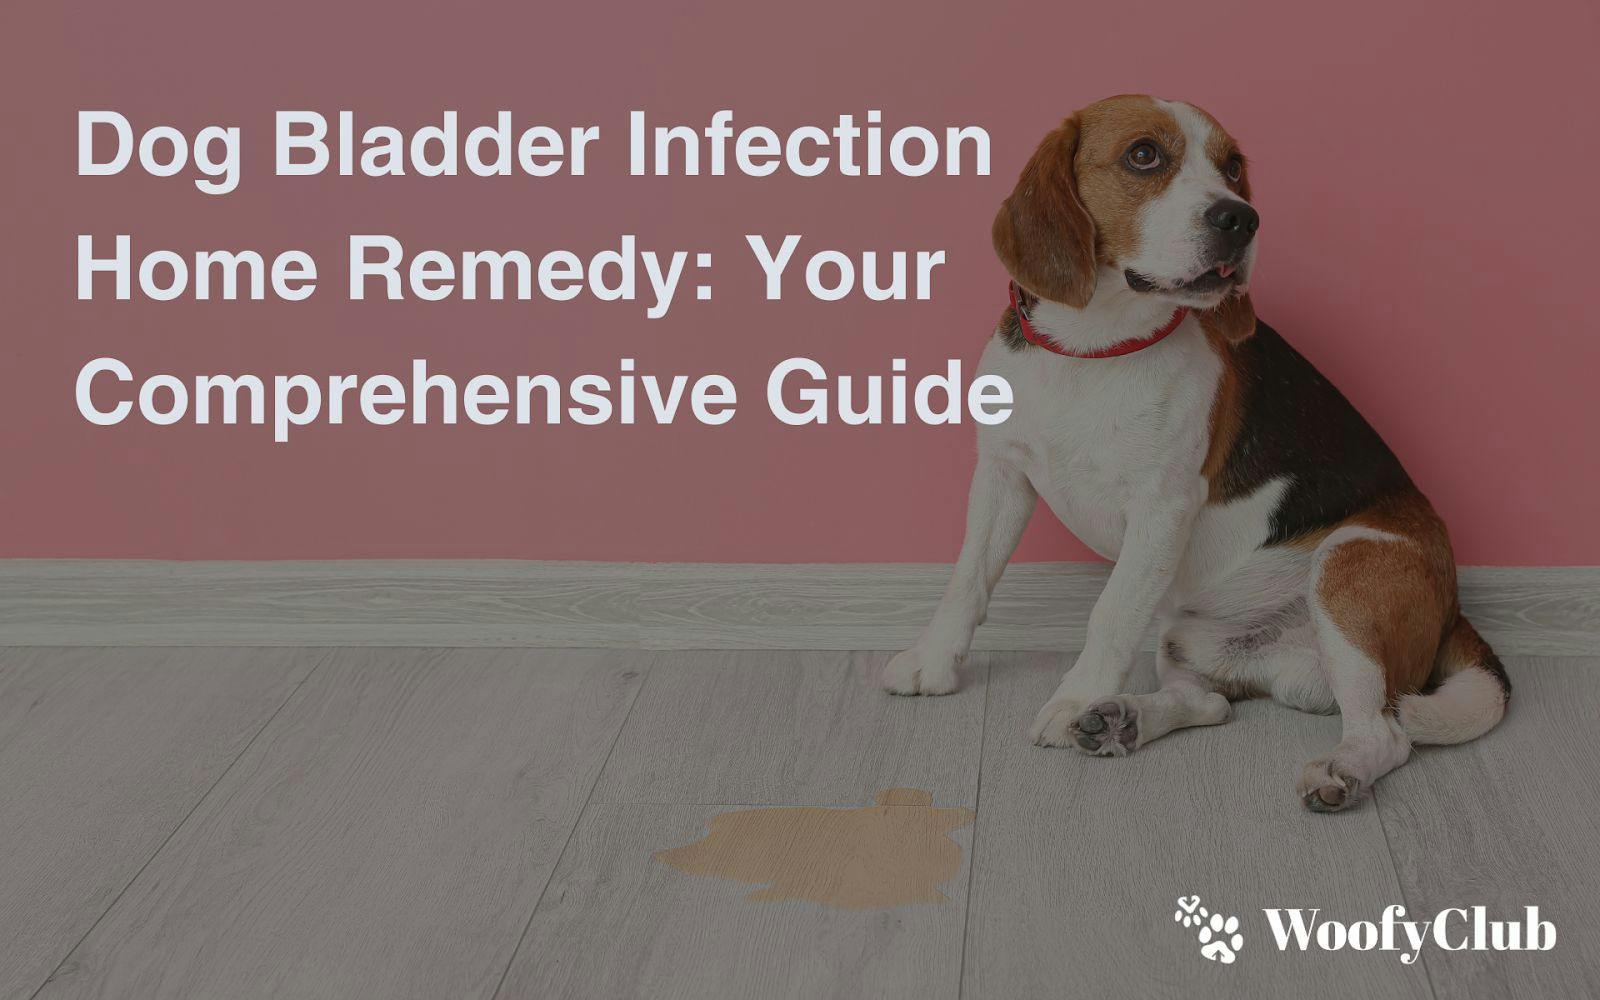 Dog Bladder Infection Home Remedy: Your Comprehensive Guide